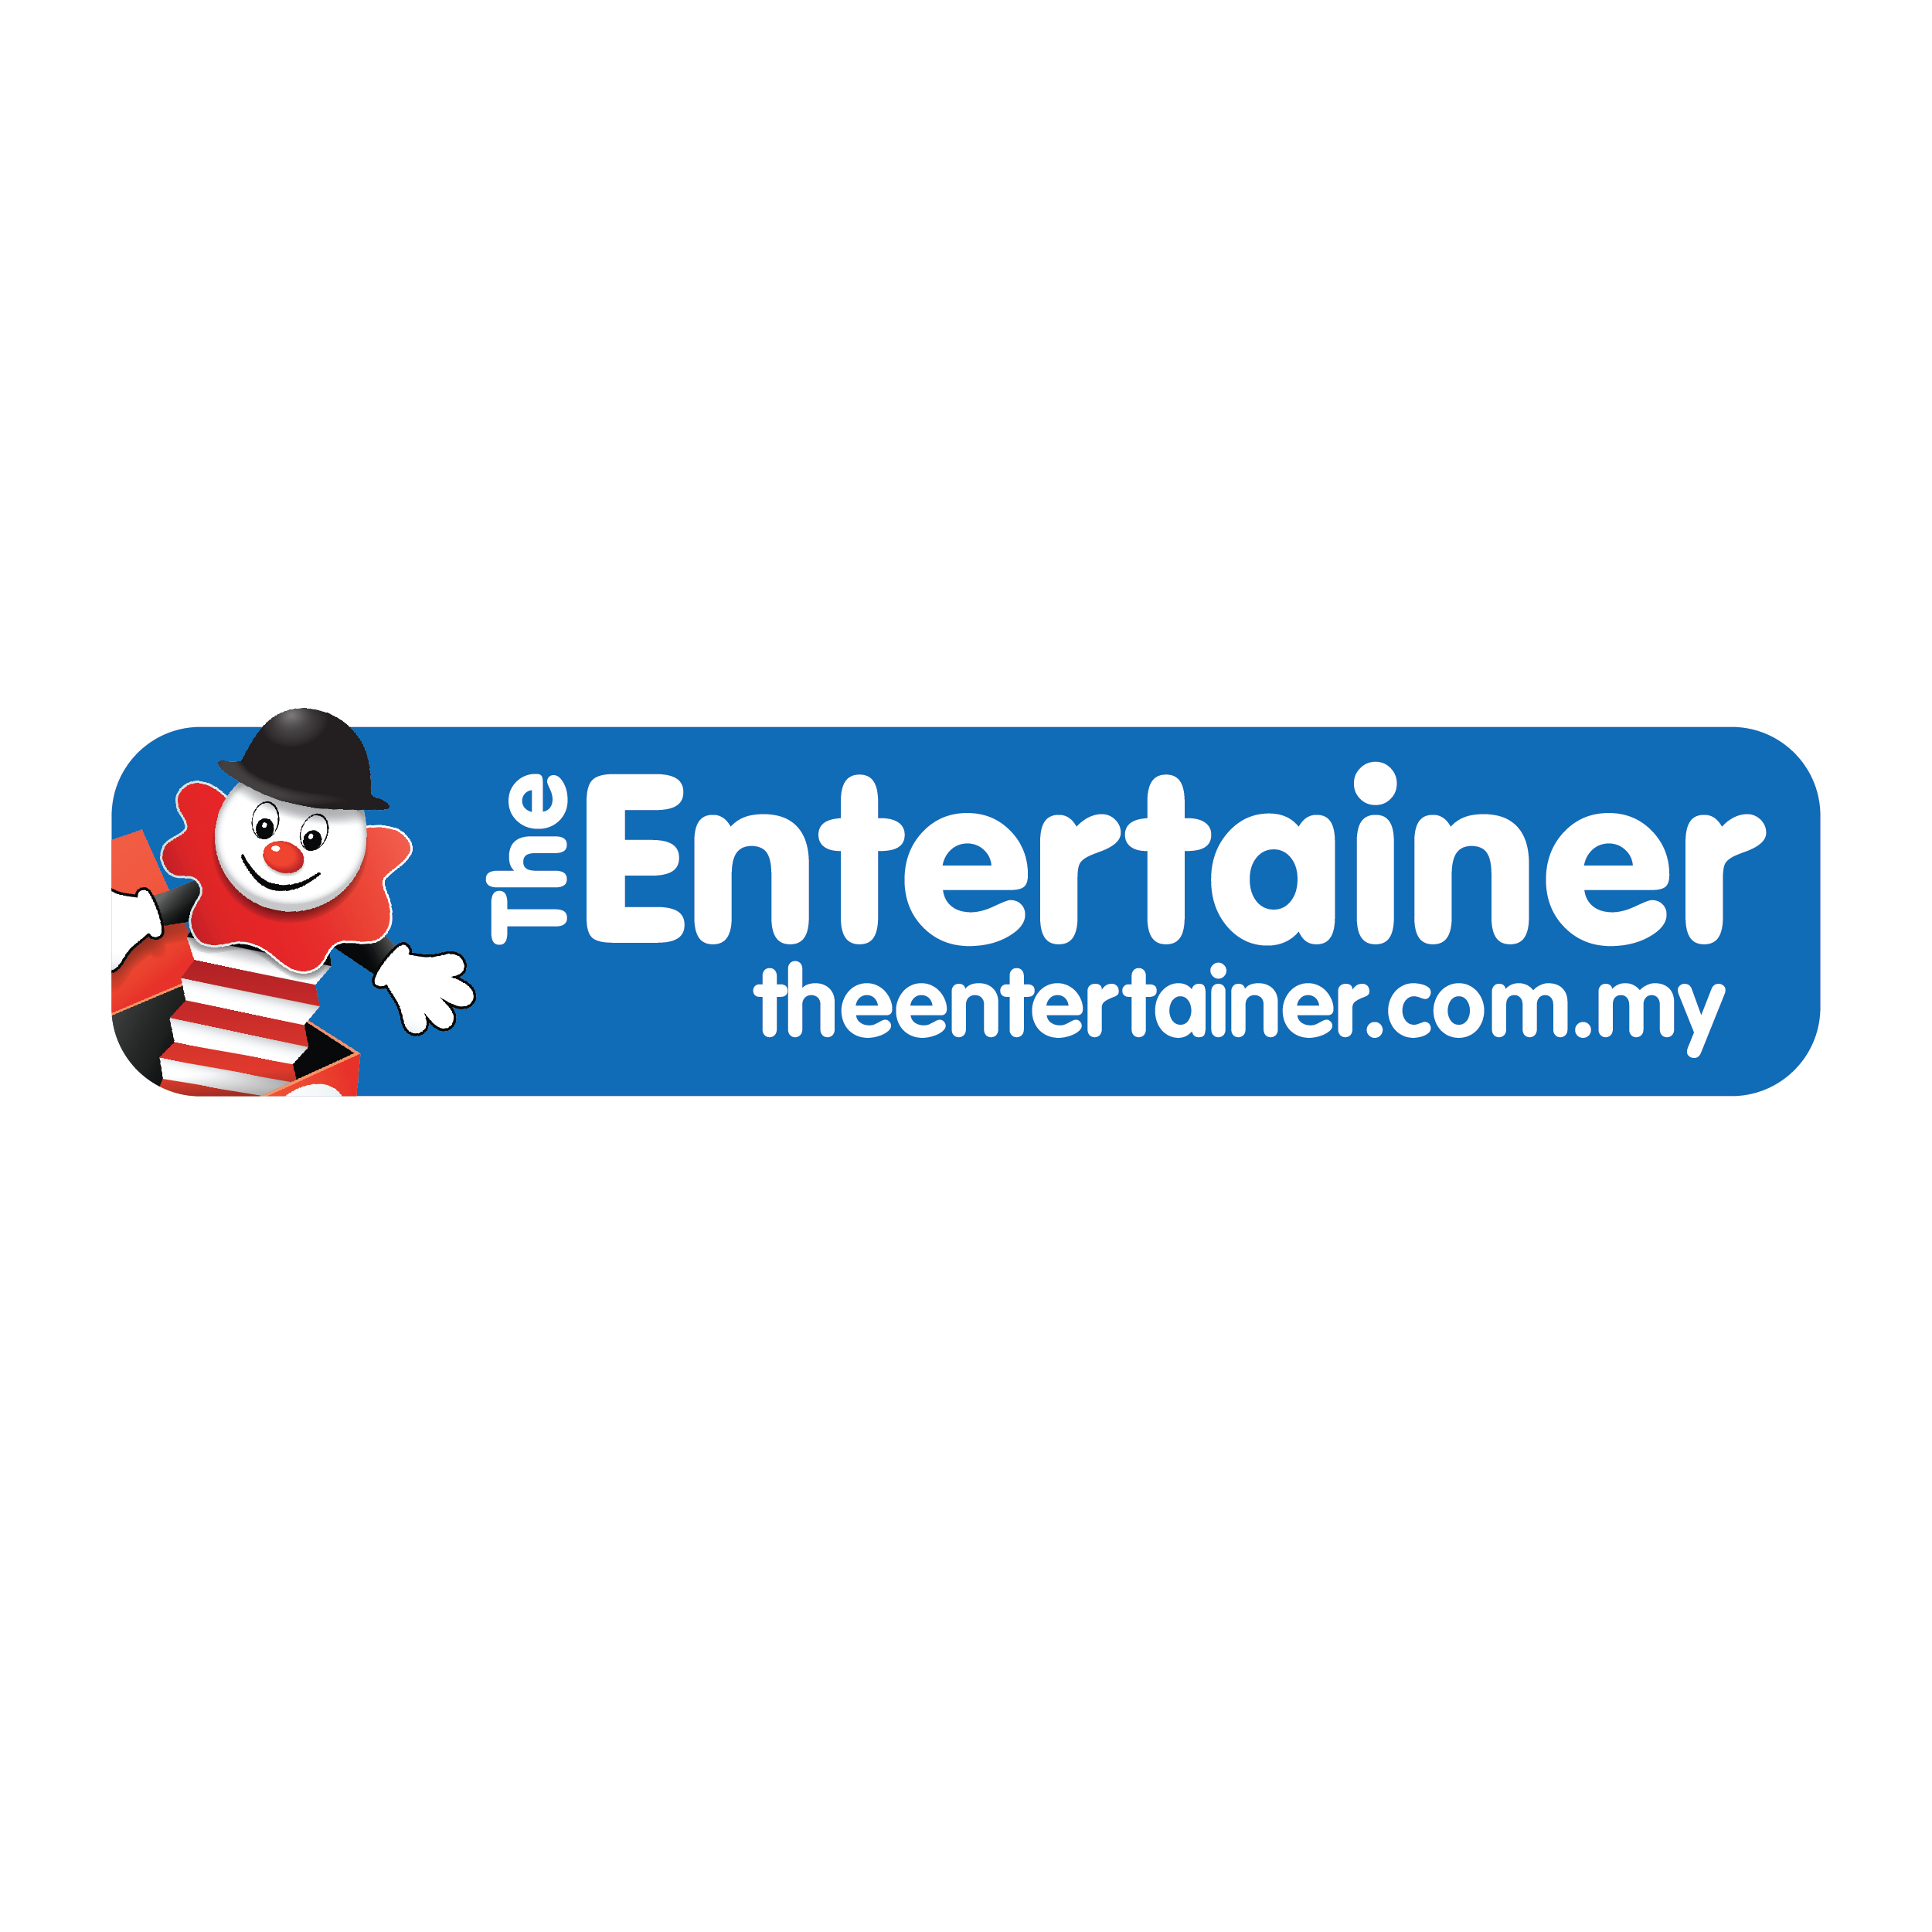 THE ENTERTAINER